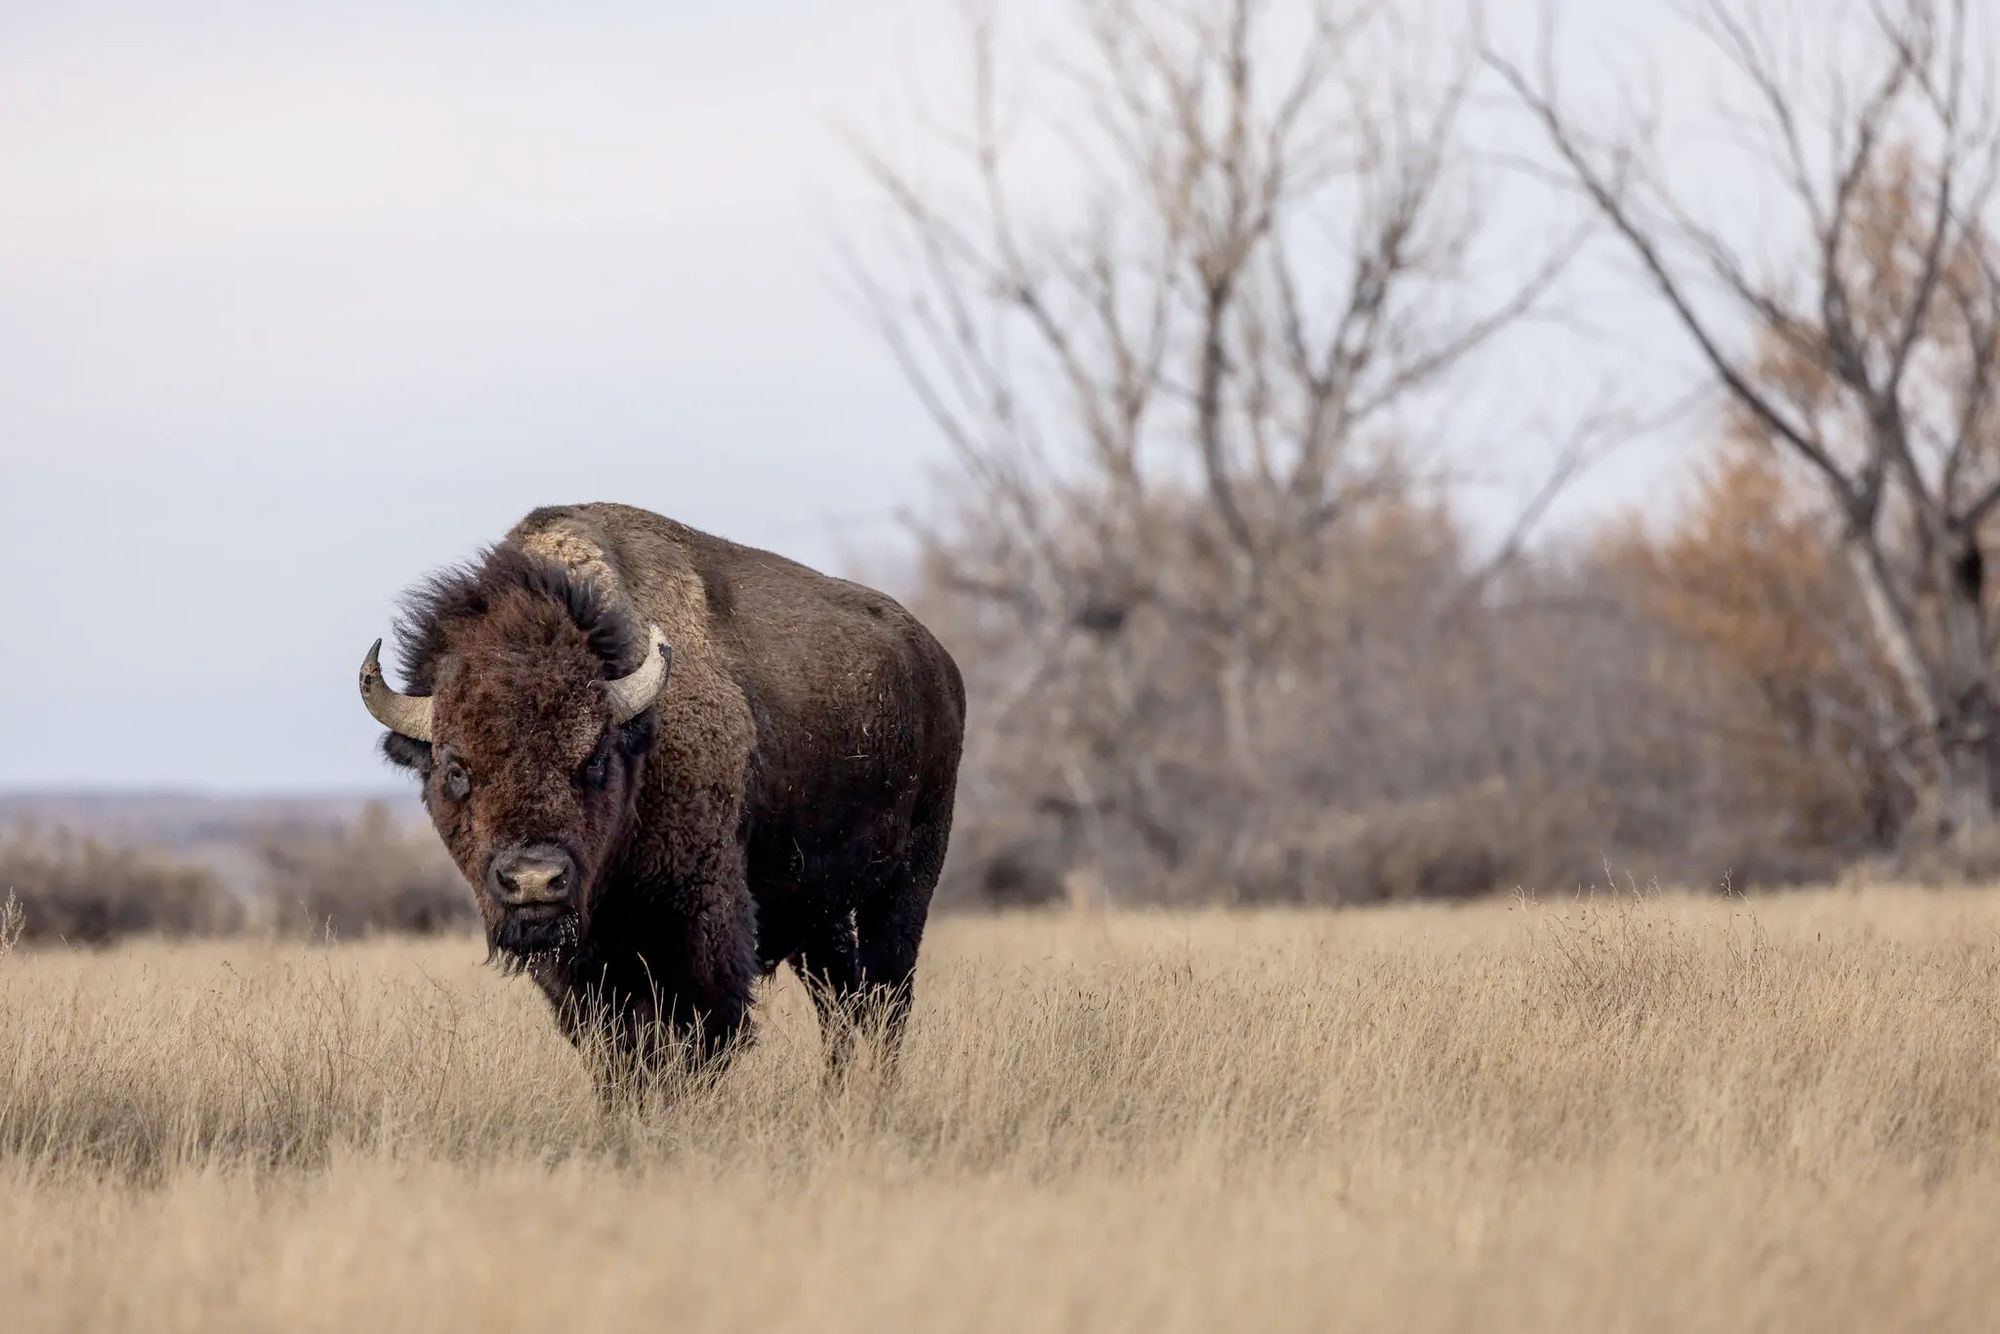 An American bison chilling out in a field